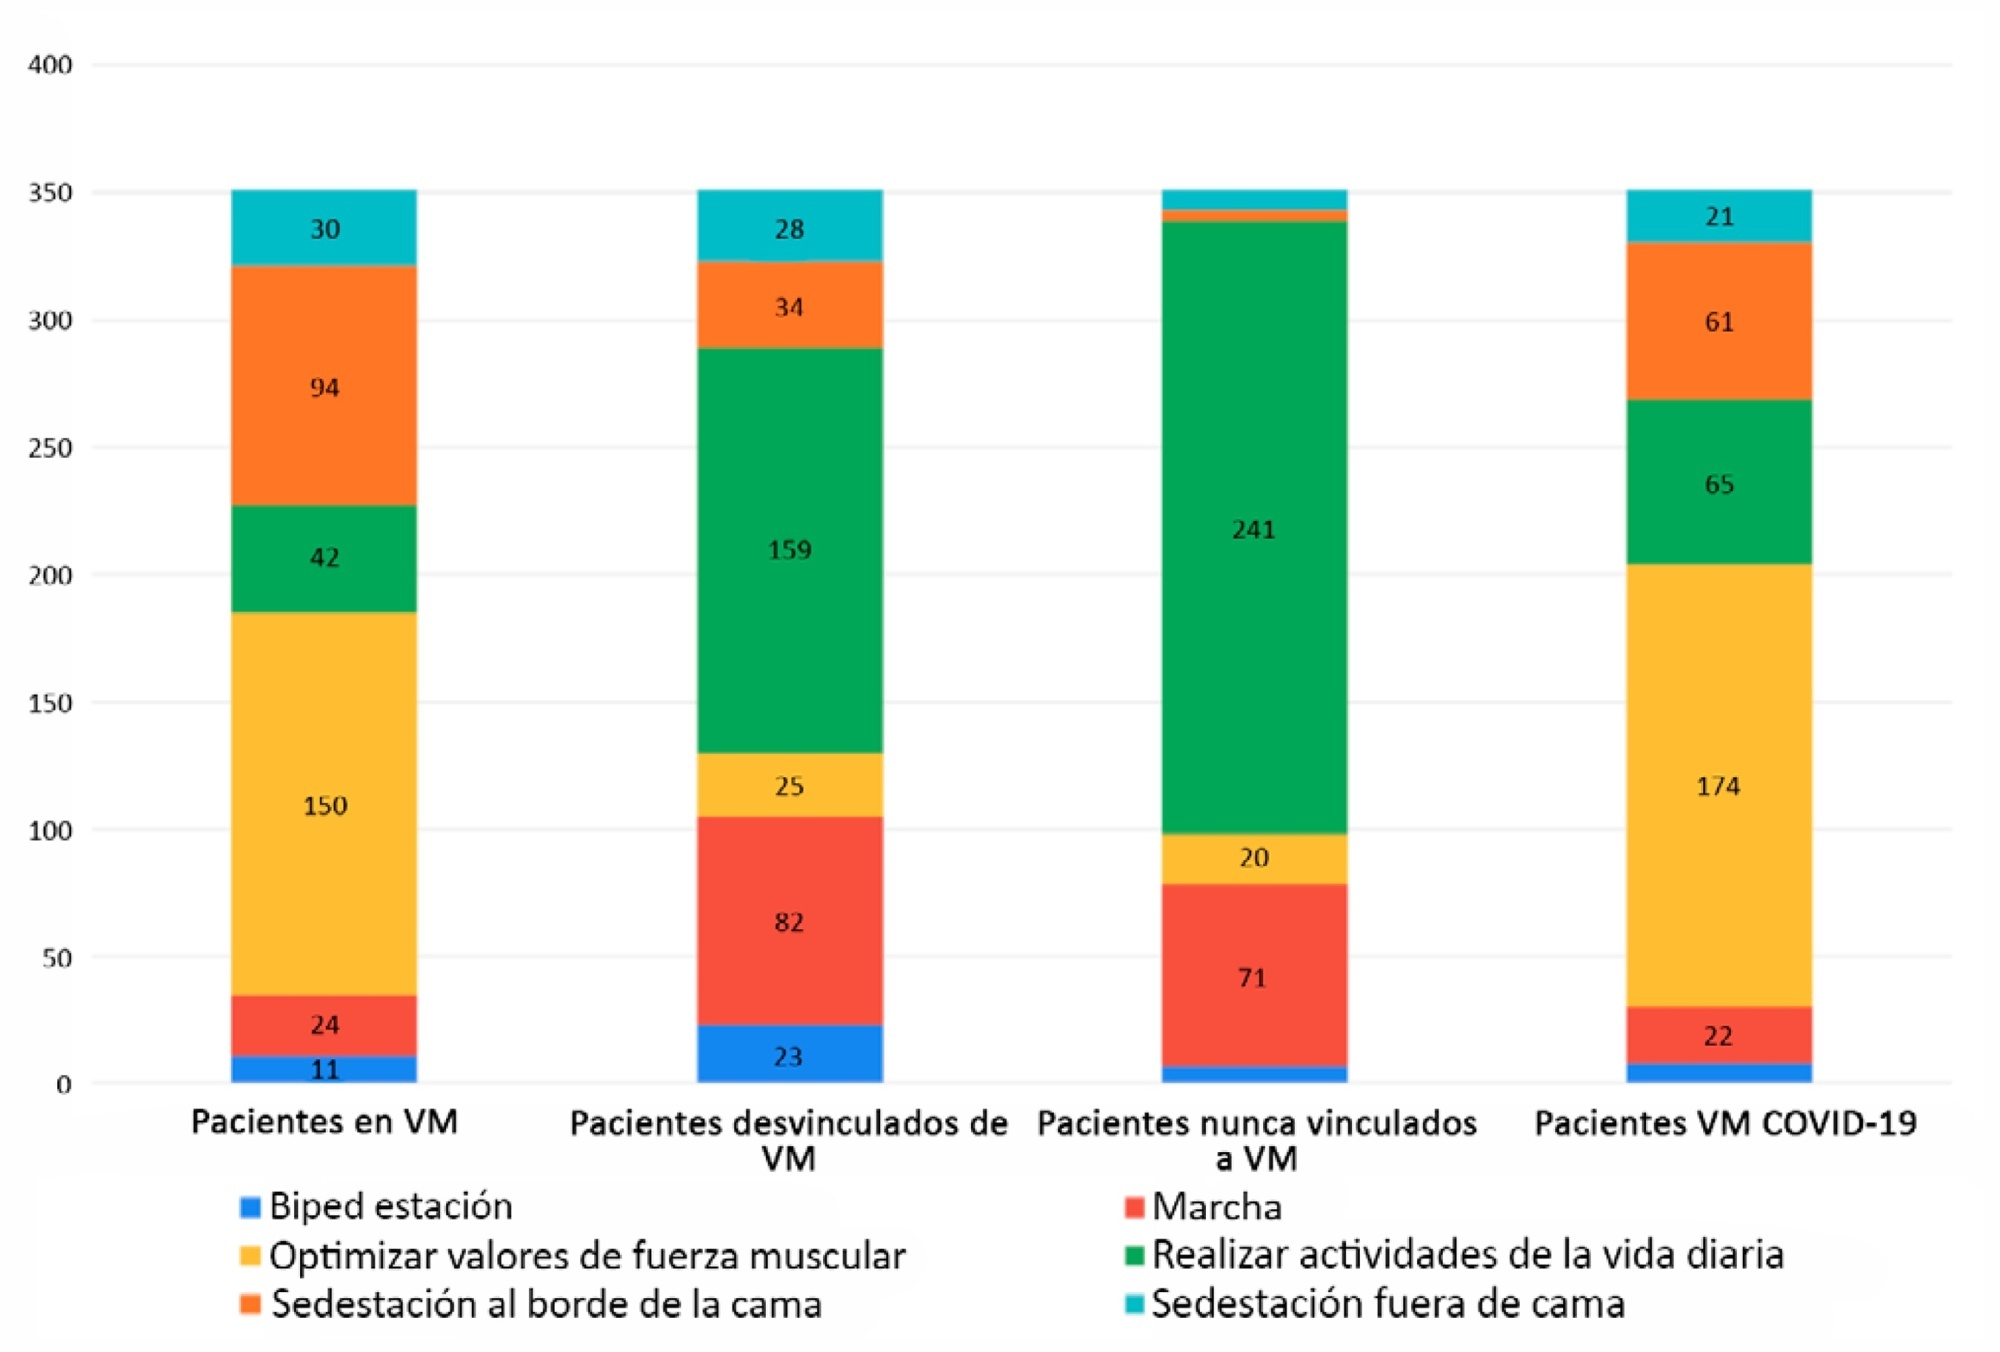 Description of physical rehabilitation in intensive care units in Argentina: usual practice and during the COVID-19 pandemic. Online survey